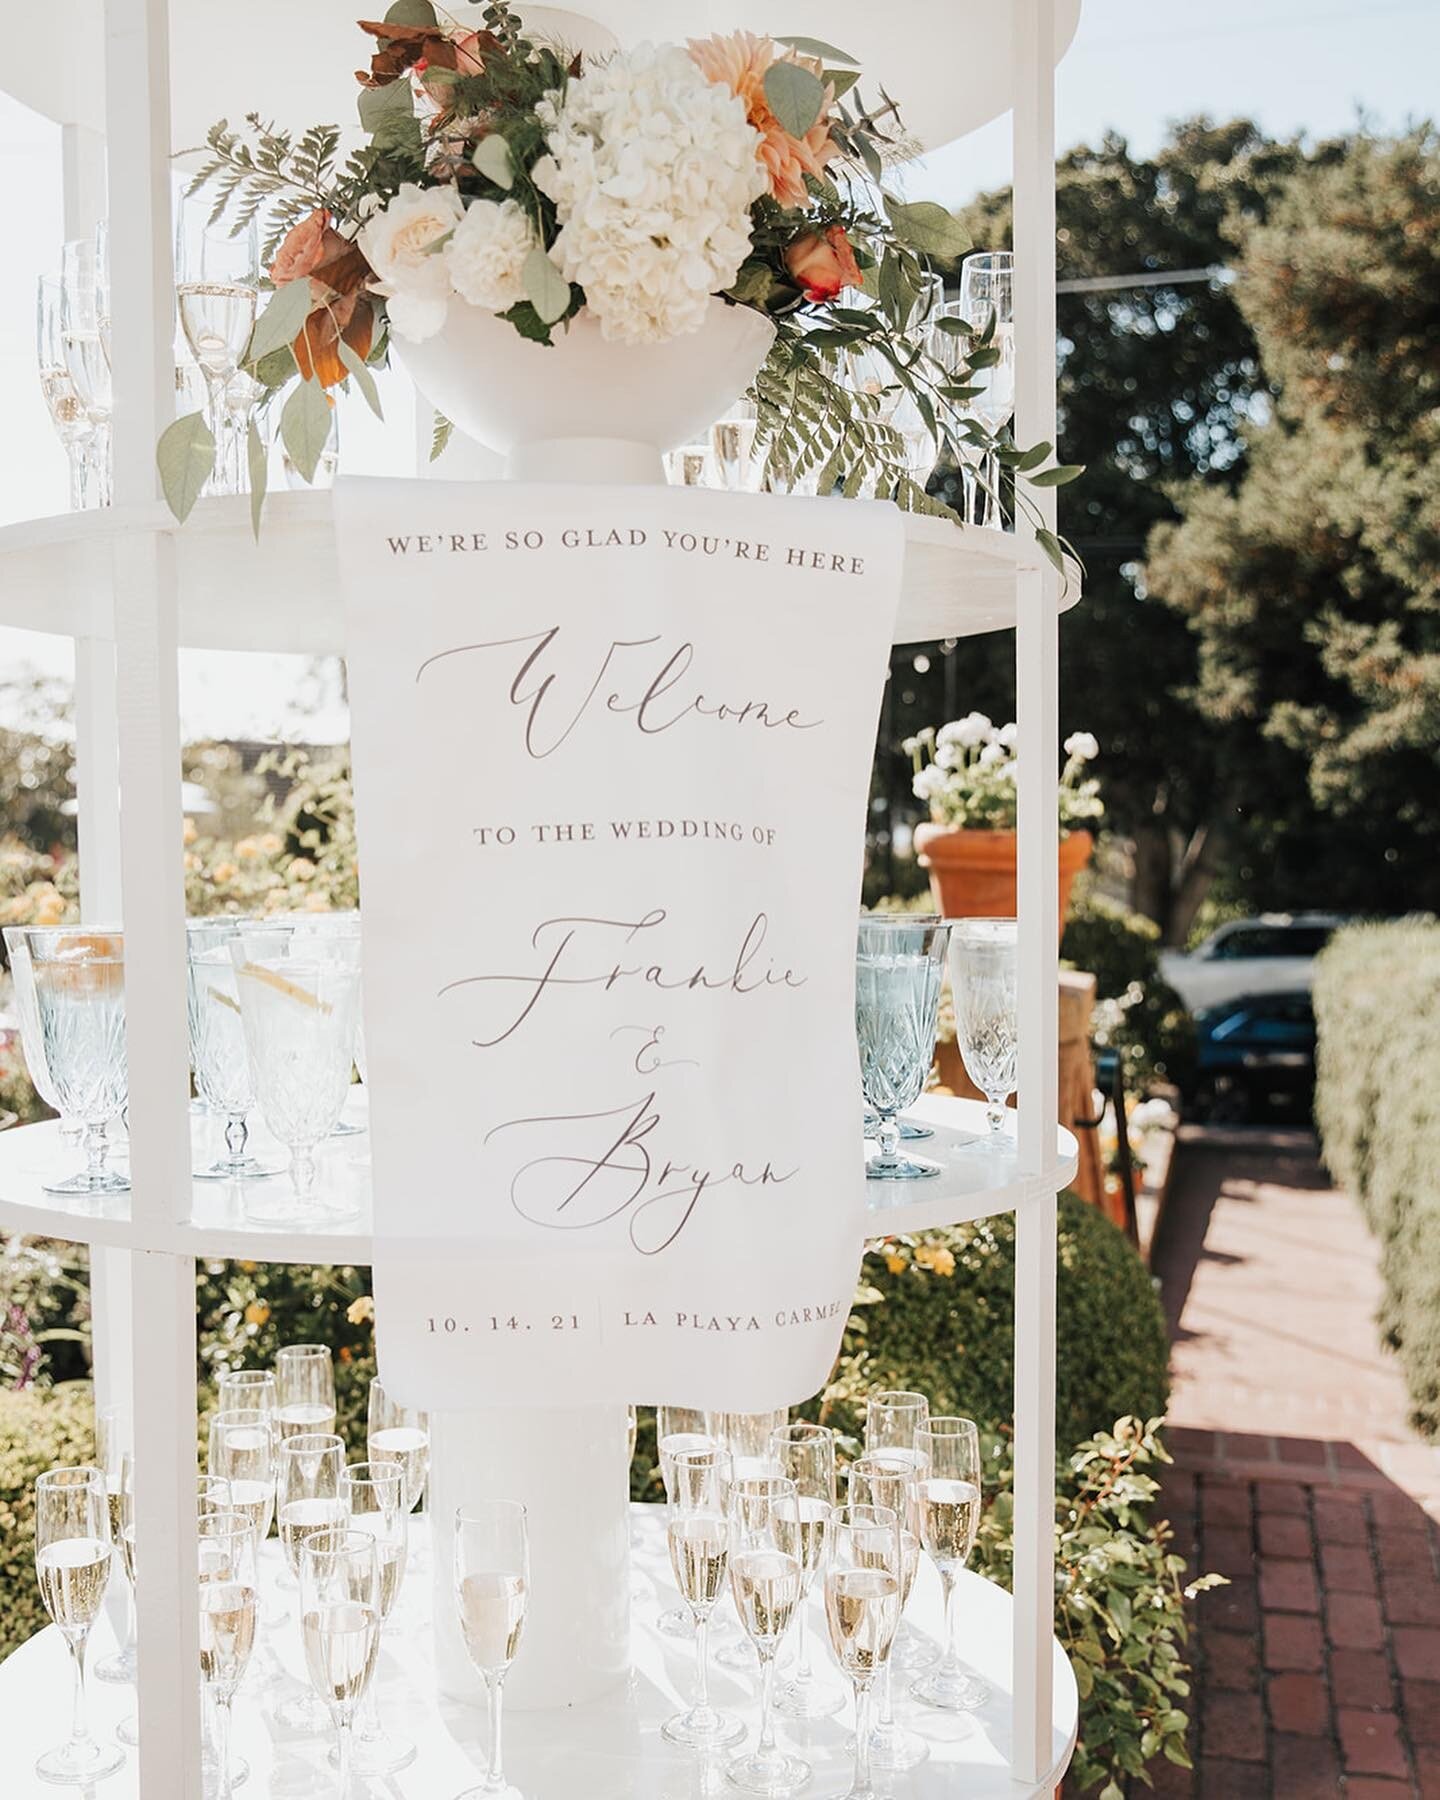 Nothing like a beautiful champagne tower to welcome you in to a beautiful Carmel wedding!! Loved designing custom signage &amp; details for this beautiful brides special day!

Planner: @atlas_designstudio 
Florals: @fleursdusoleilmonterey 
Photograph